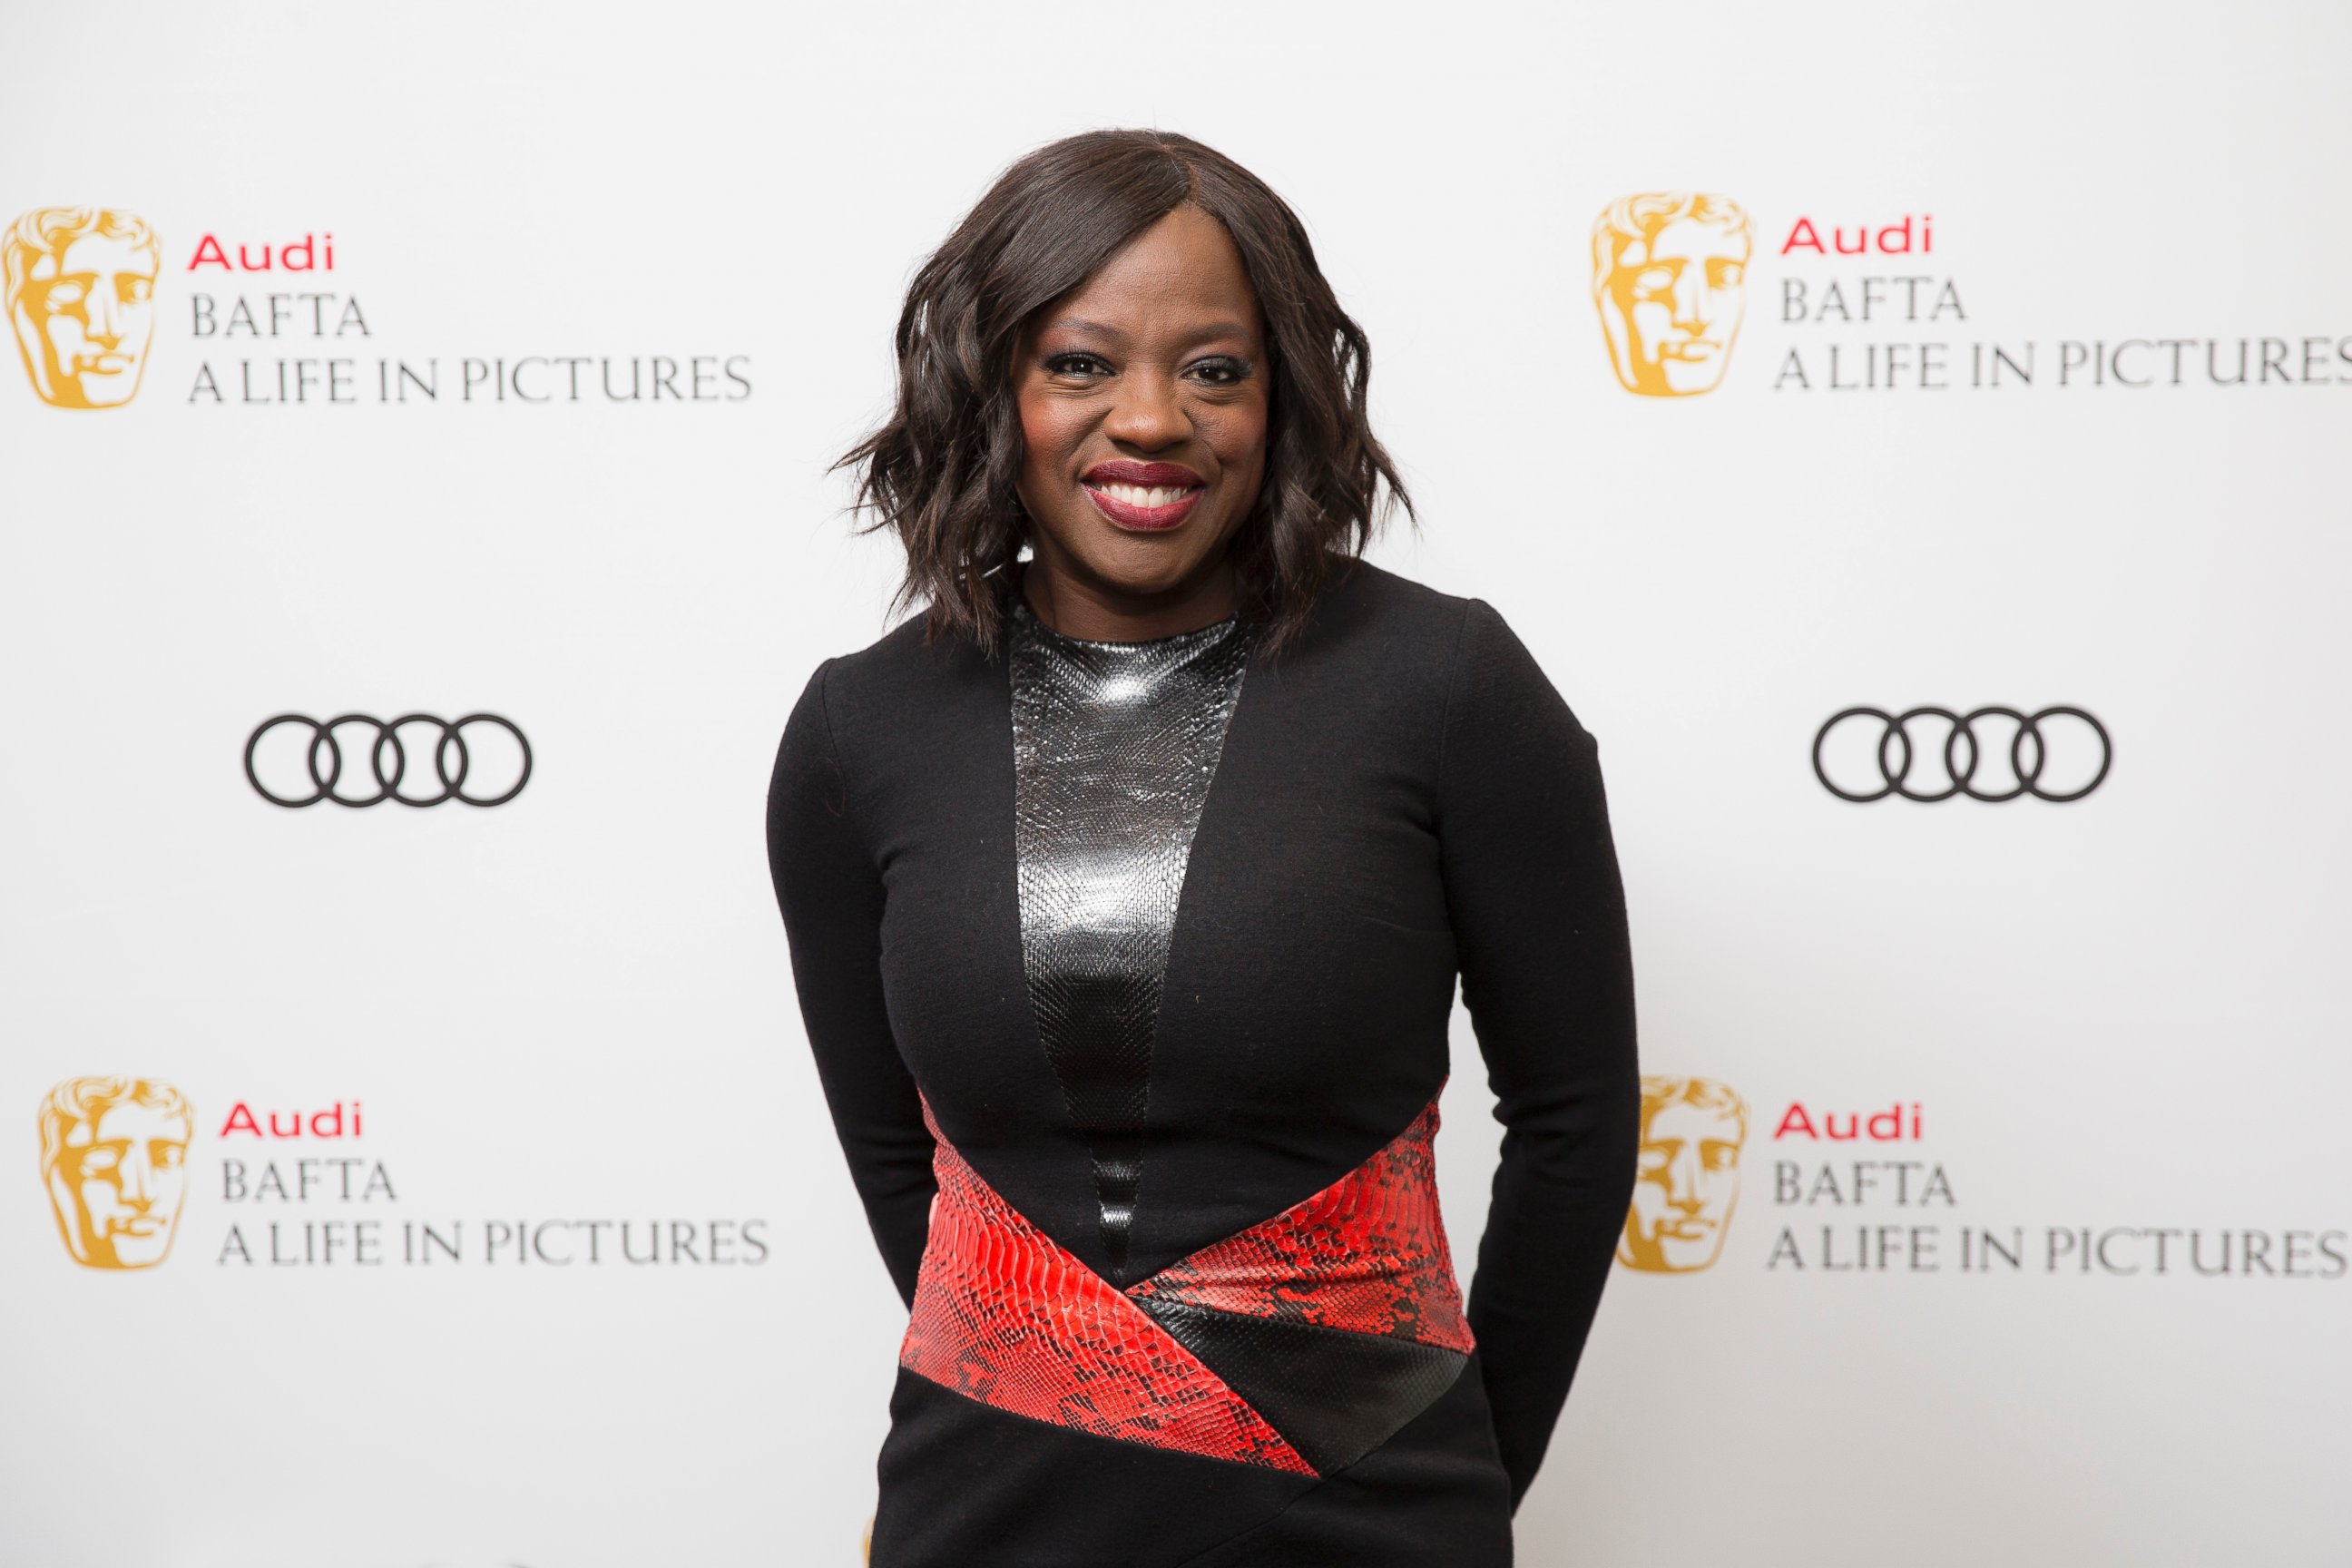 PHOTO: Actress Viola Davis poses for photographers upon arrival at a BAFTA Life in Pictures photo call, at BAFTA headquarters in London, Jan. 15, 2017.